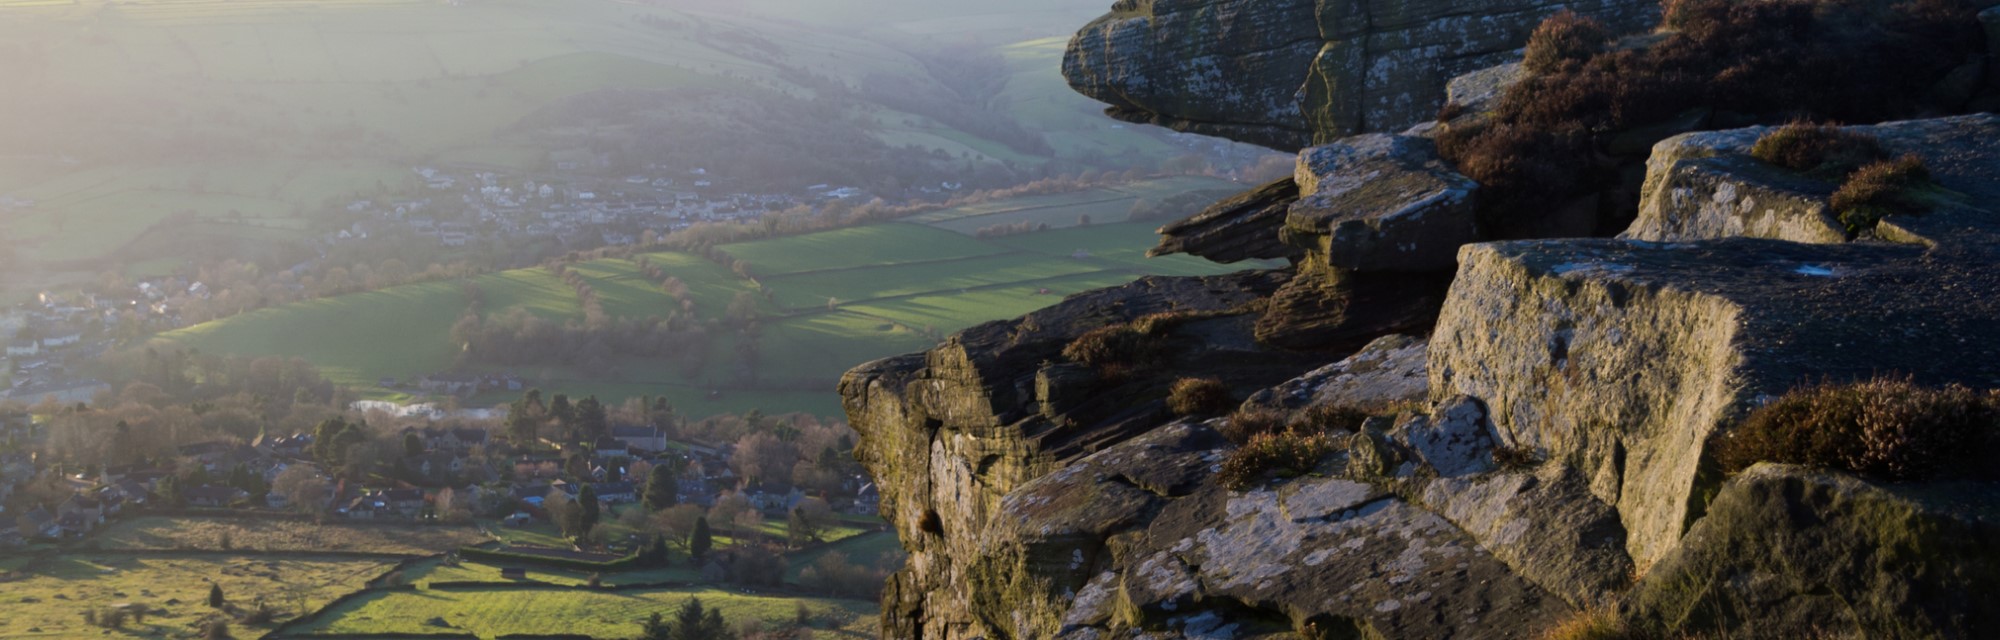 Must-see outdoor adventure spots in the UK